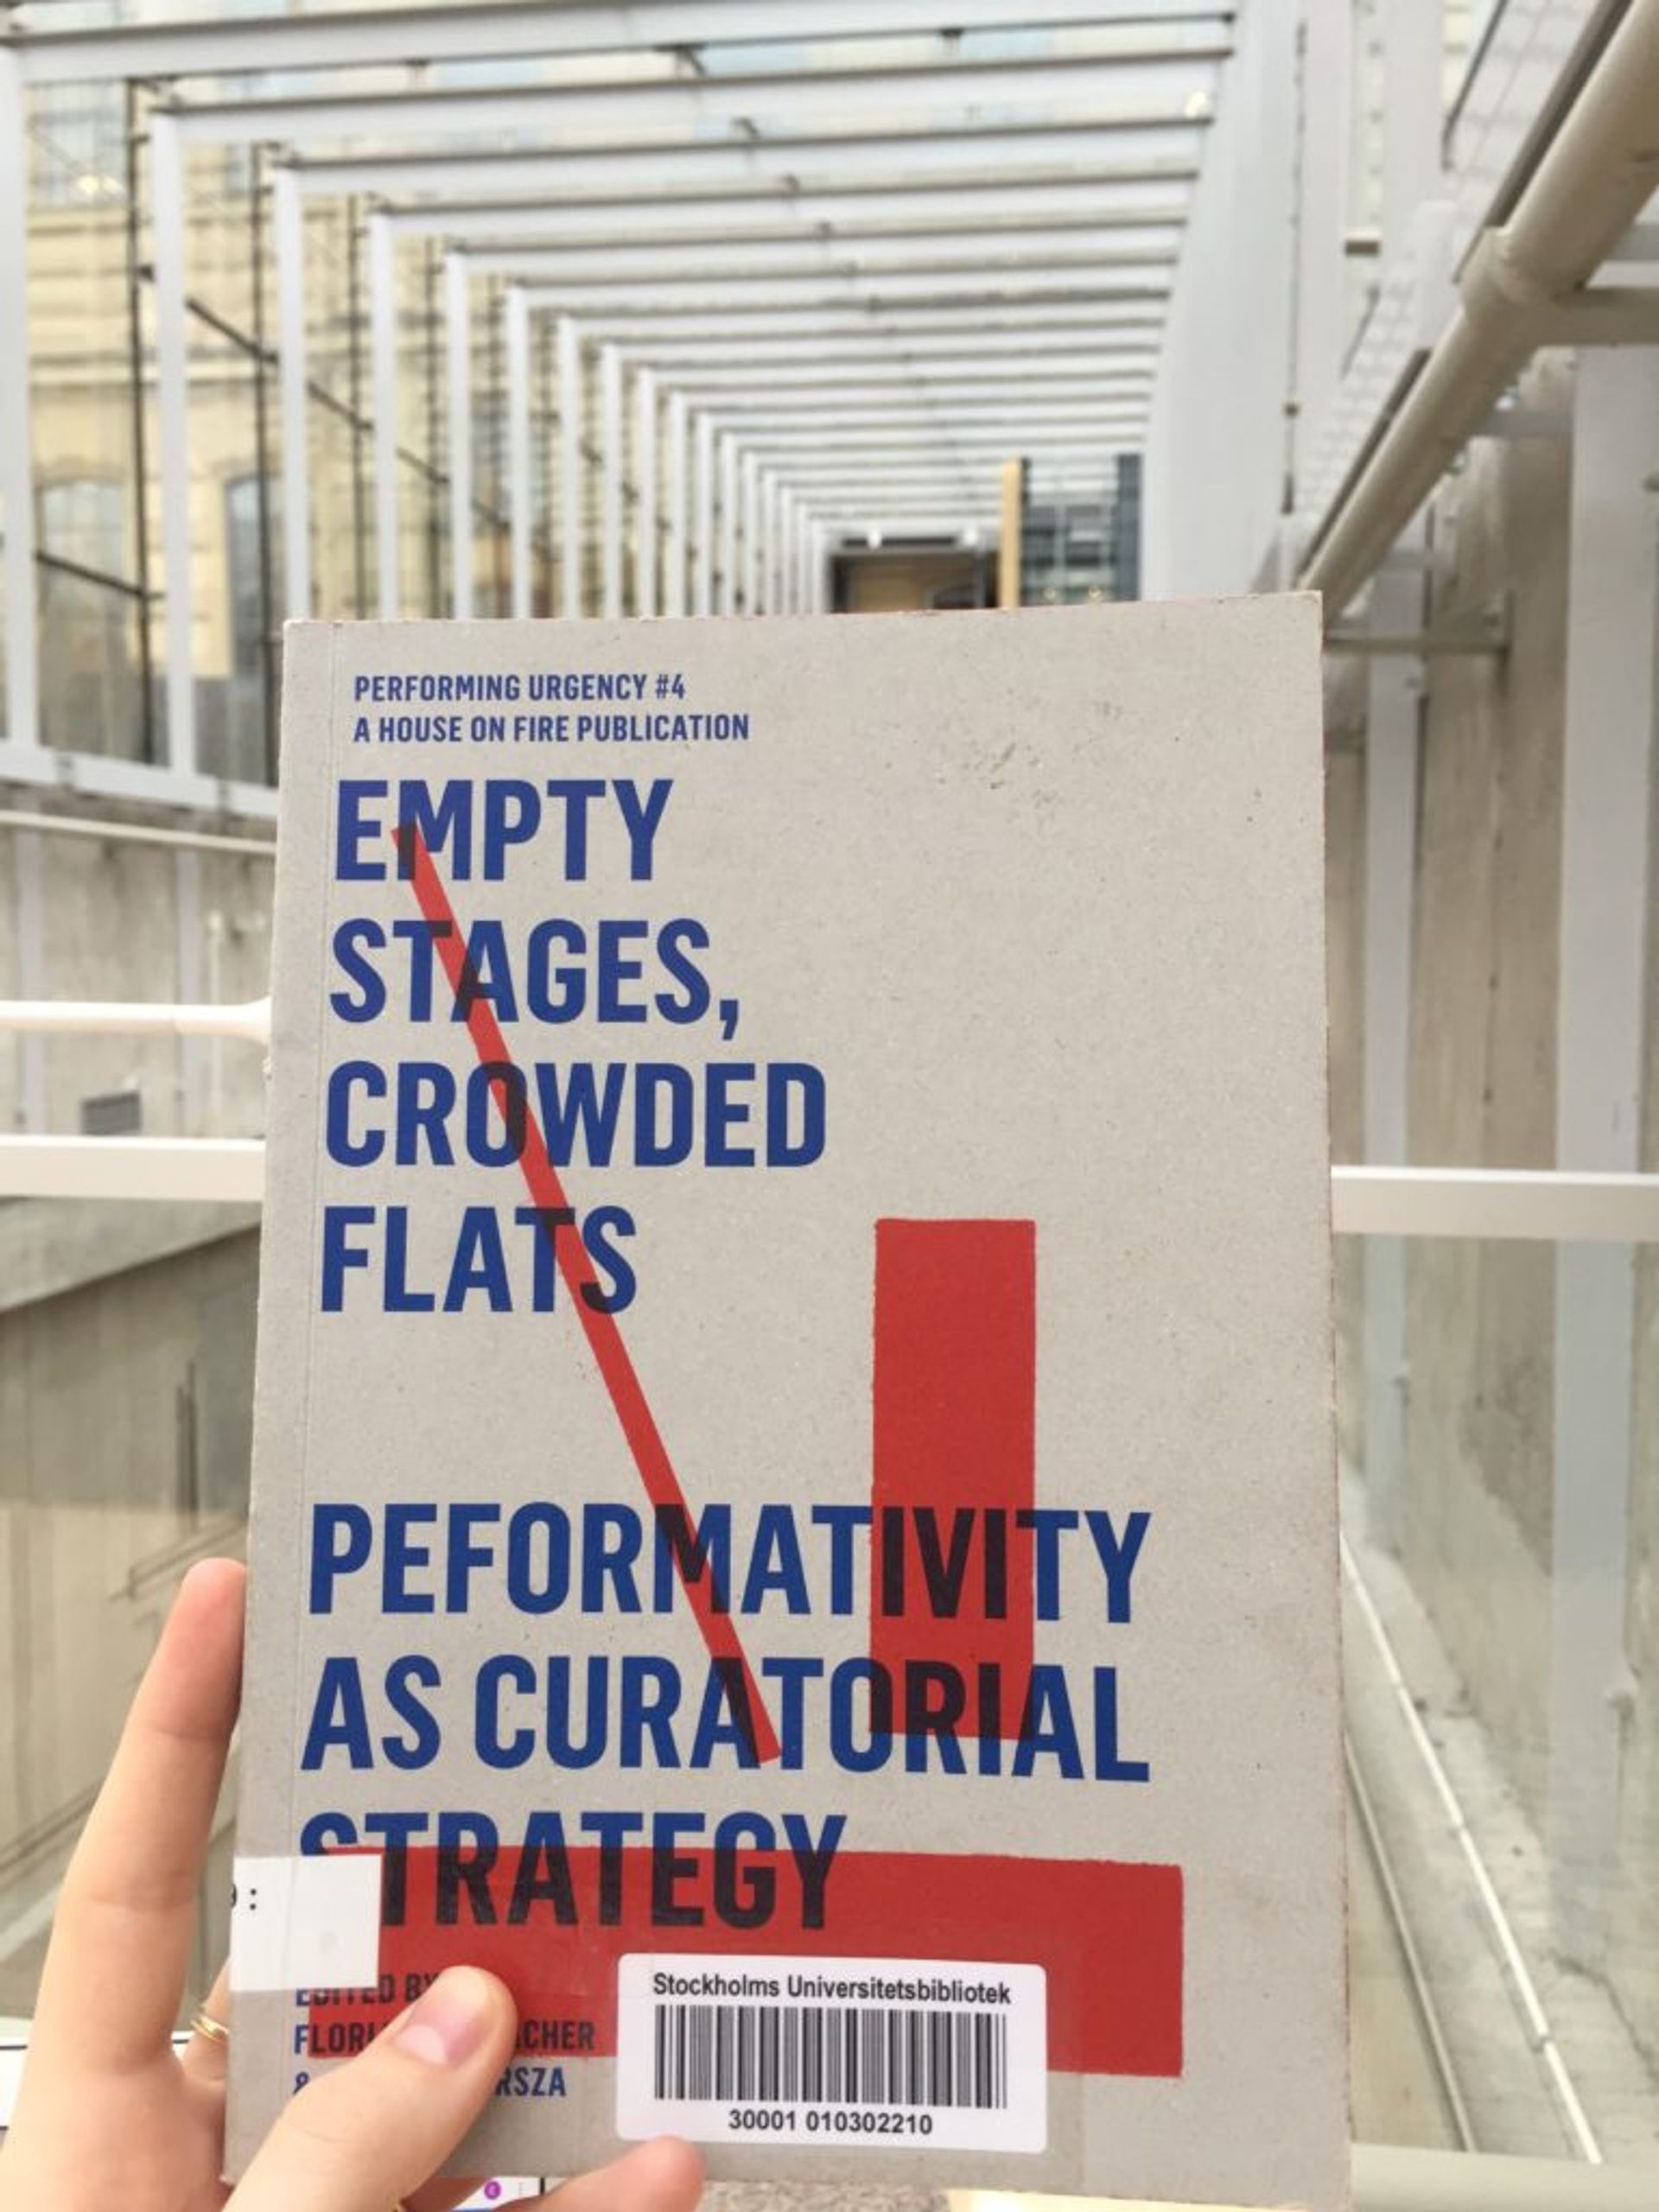 A book from the author's class called " Empty stages, crowded flats - peformativity as curatoial stratergy".